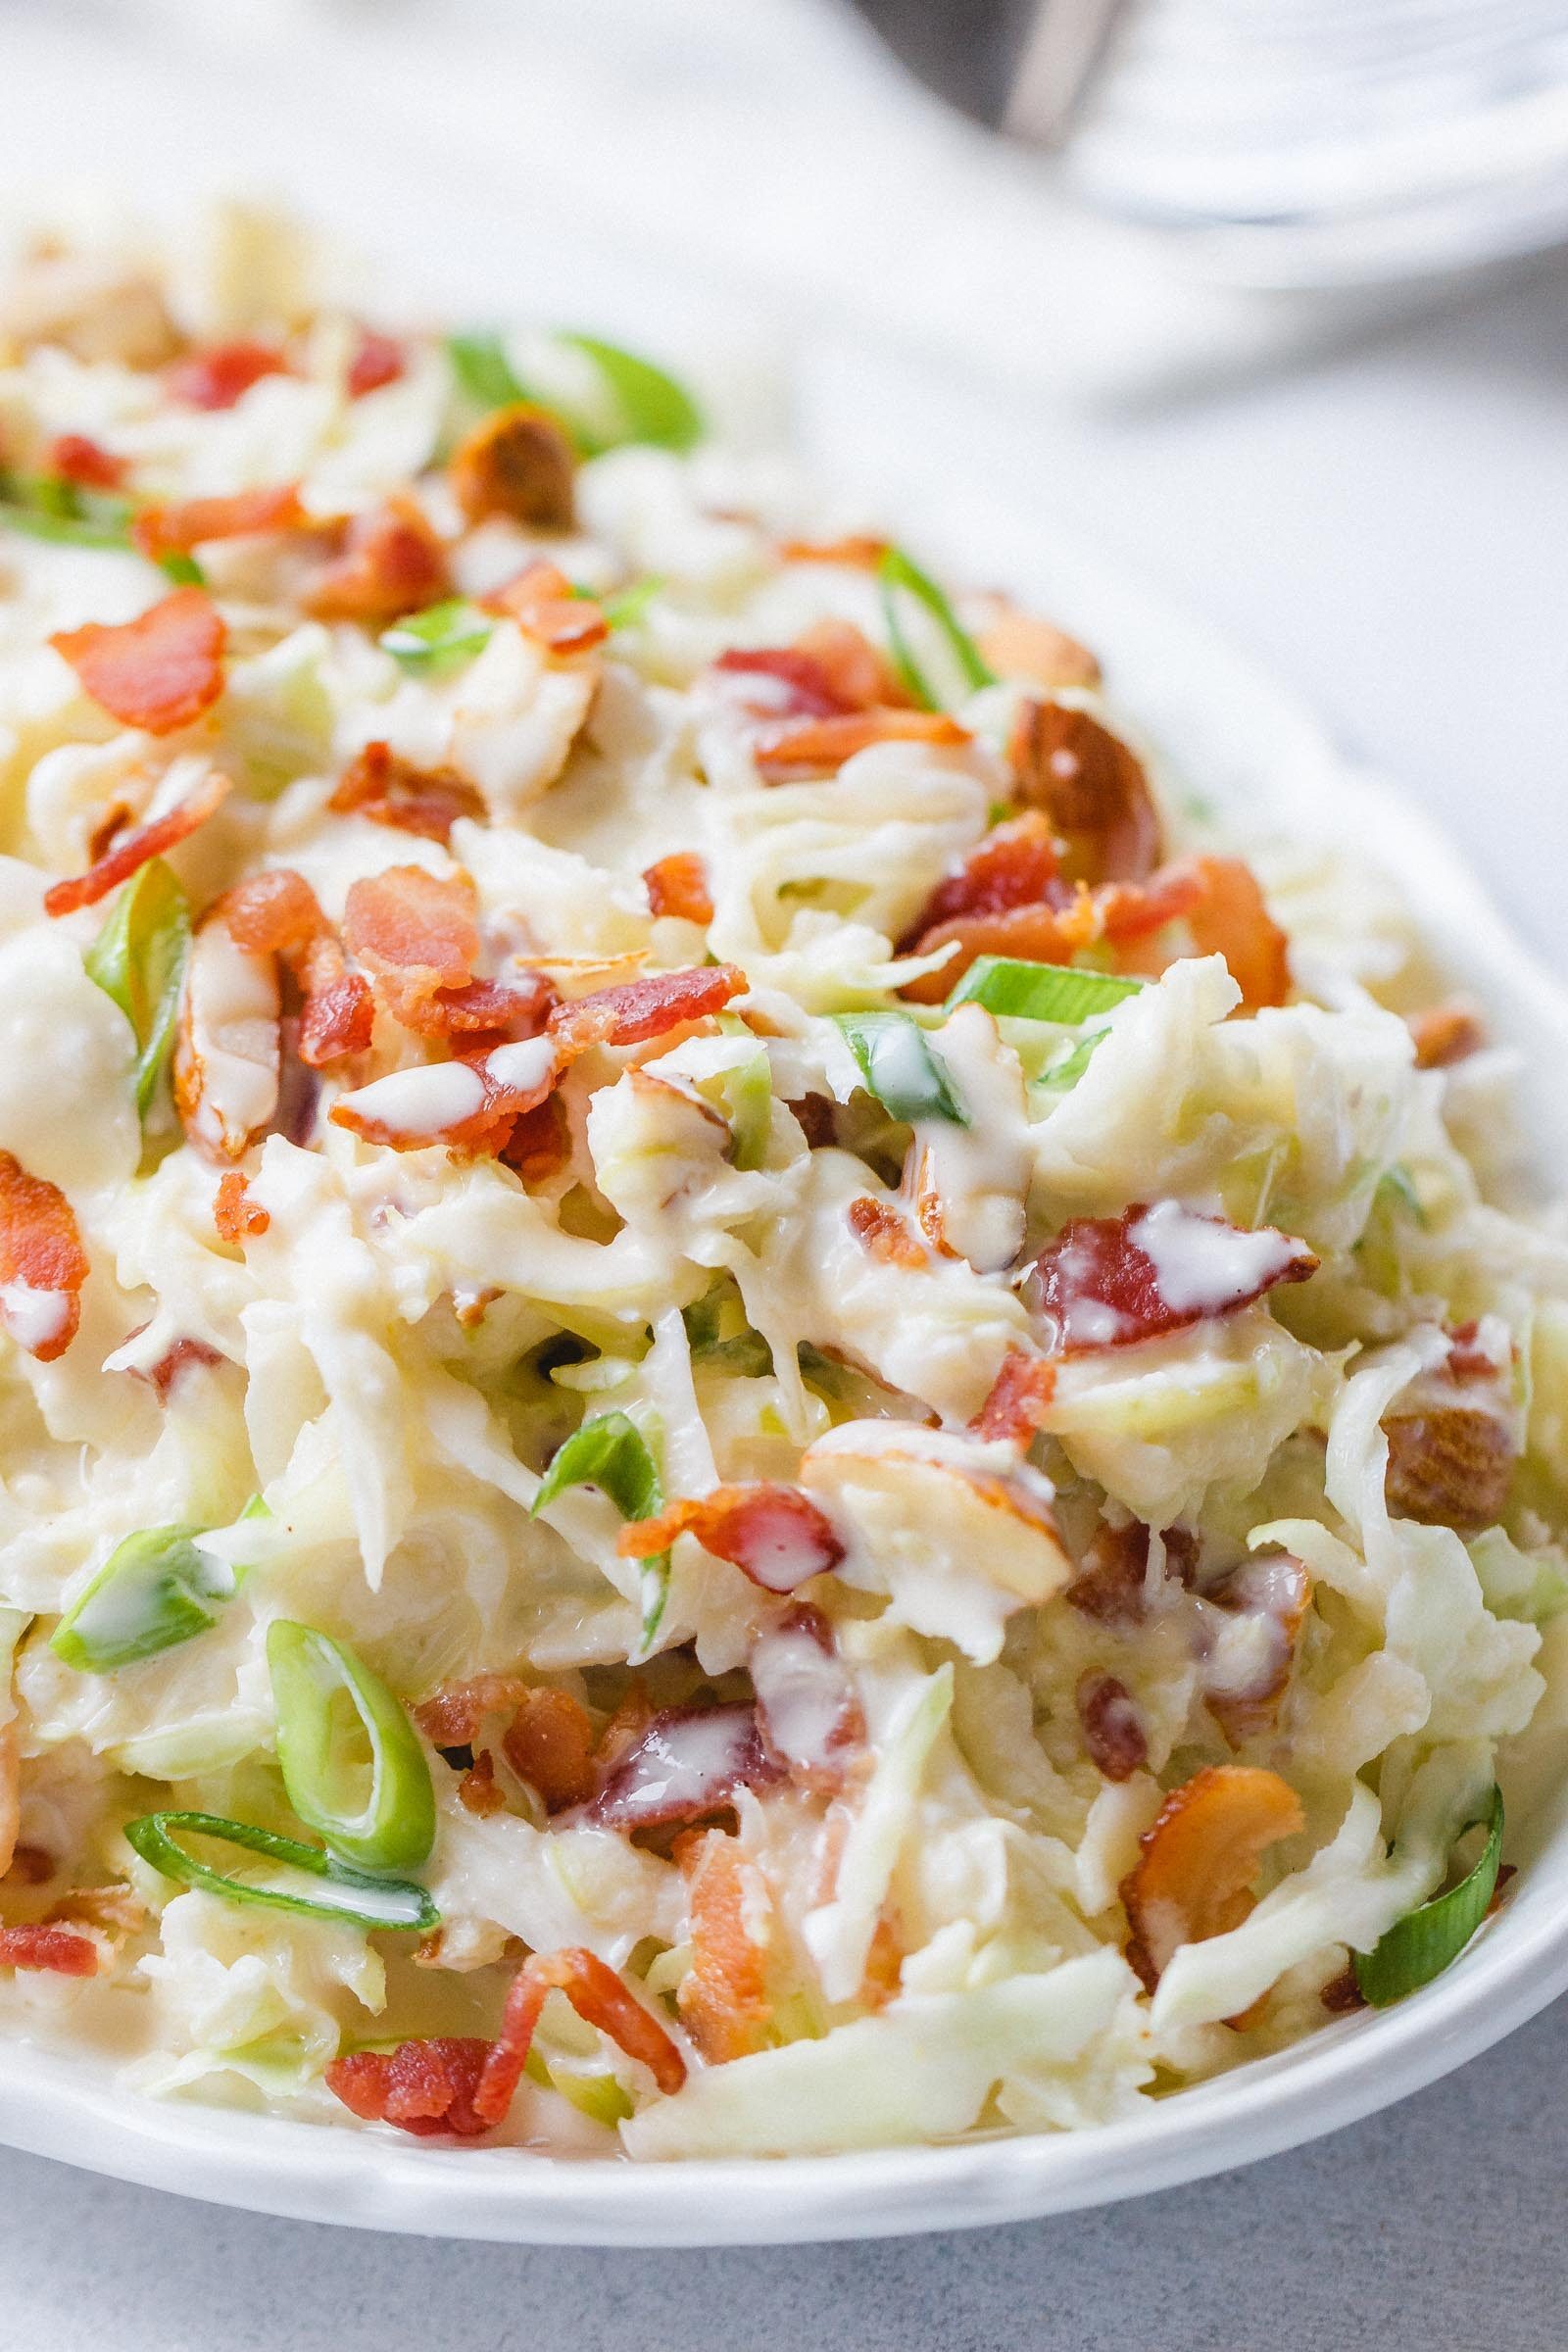 Apple Bacon Coleslaw - Super creamy, crunchy, and fresh! This coleslaw recipe only takes a few minutes to make and is packed with bright and delicious flavor!